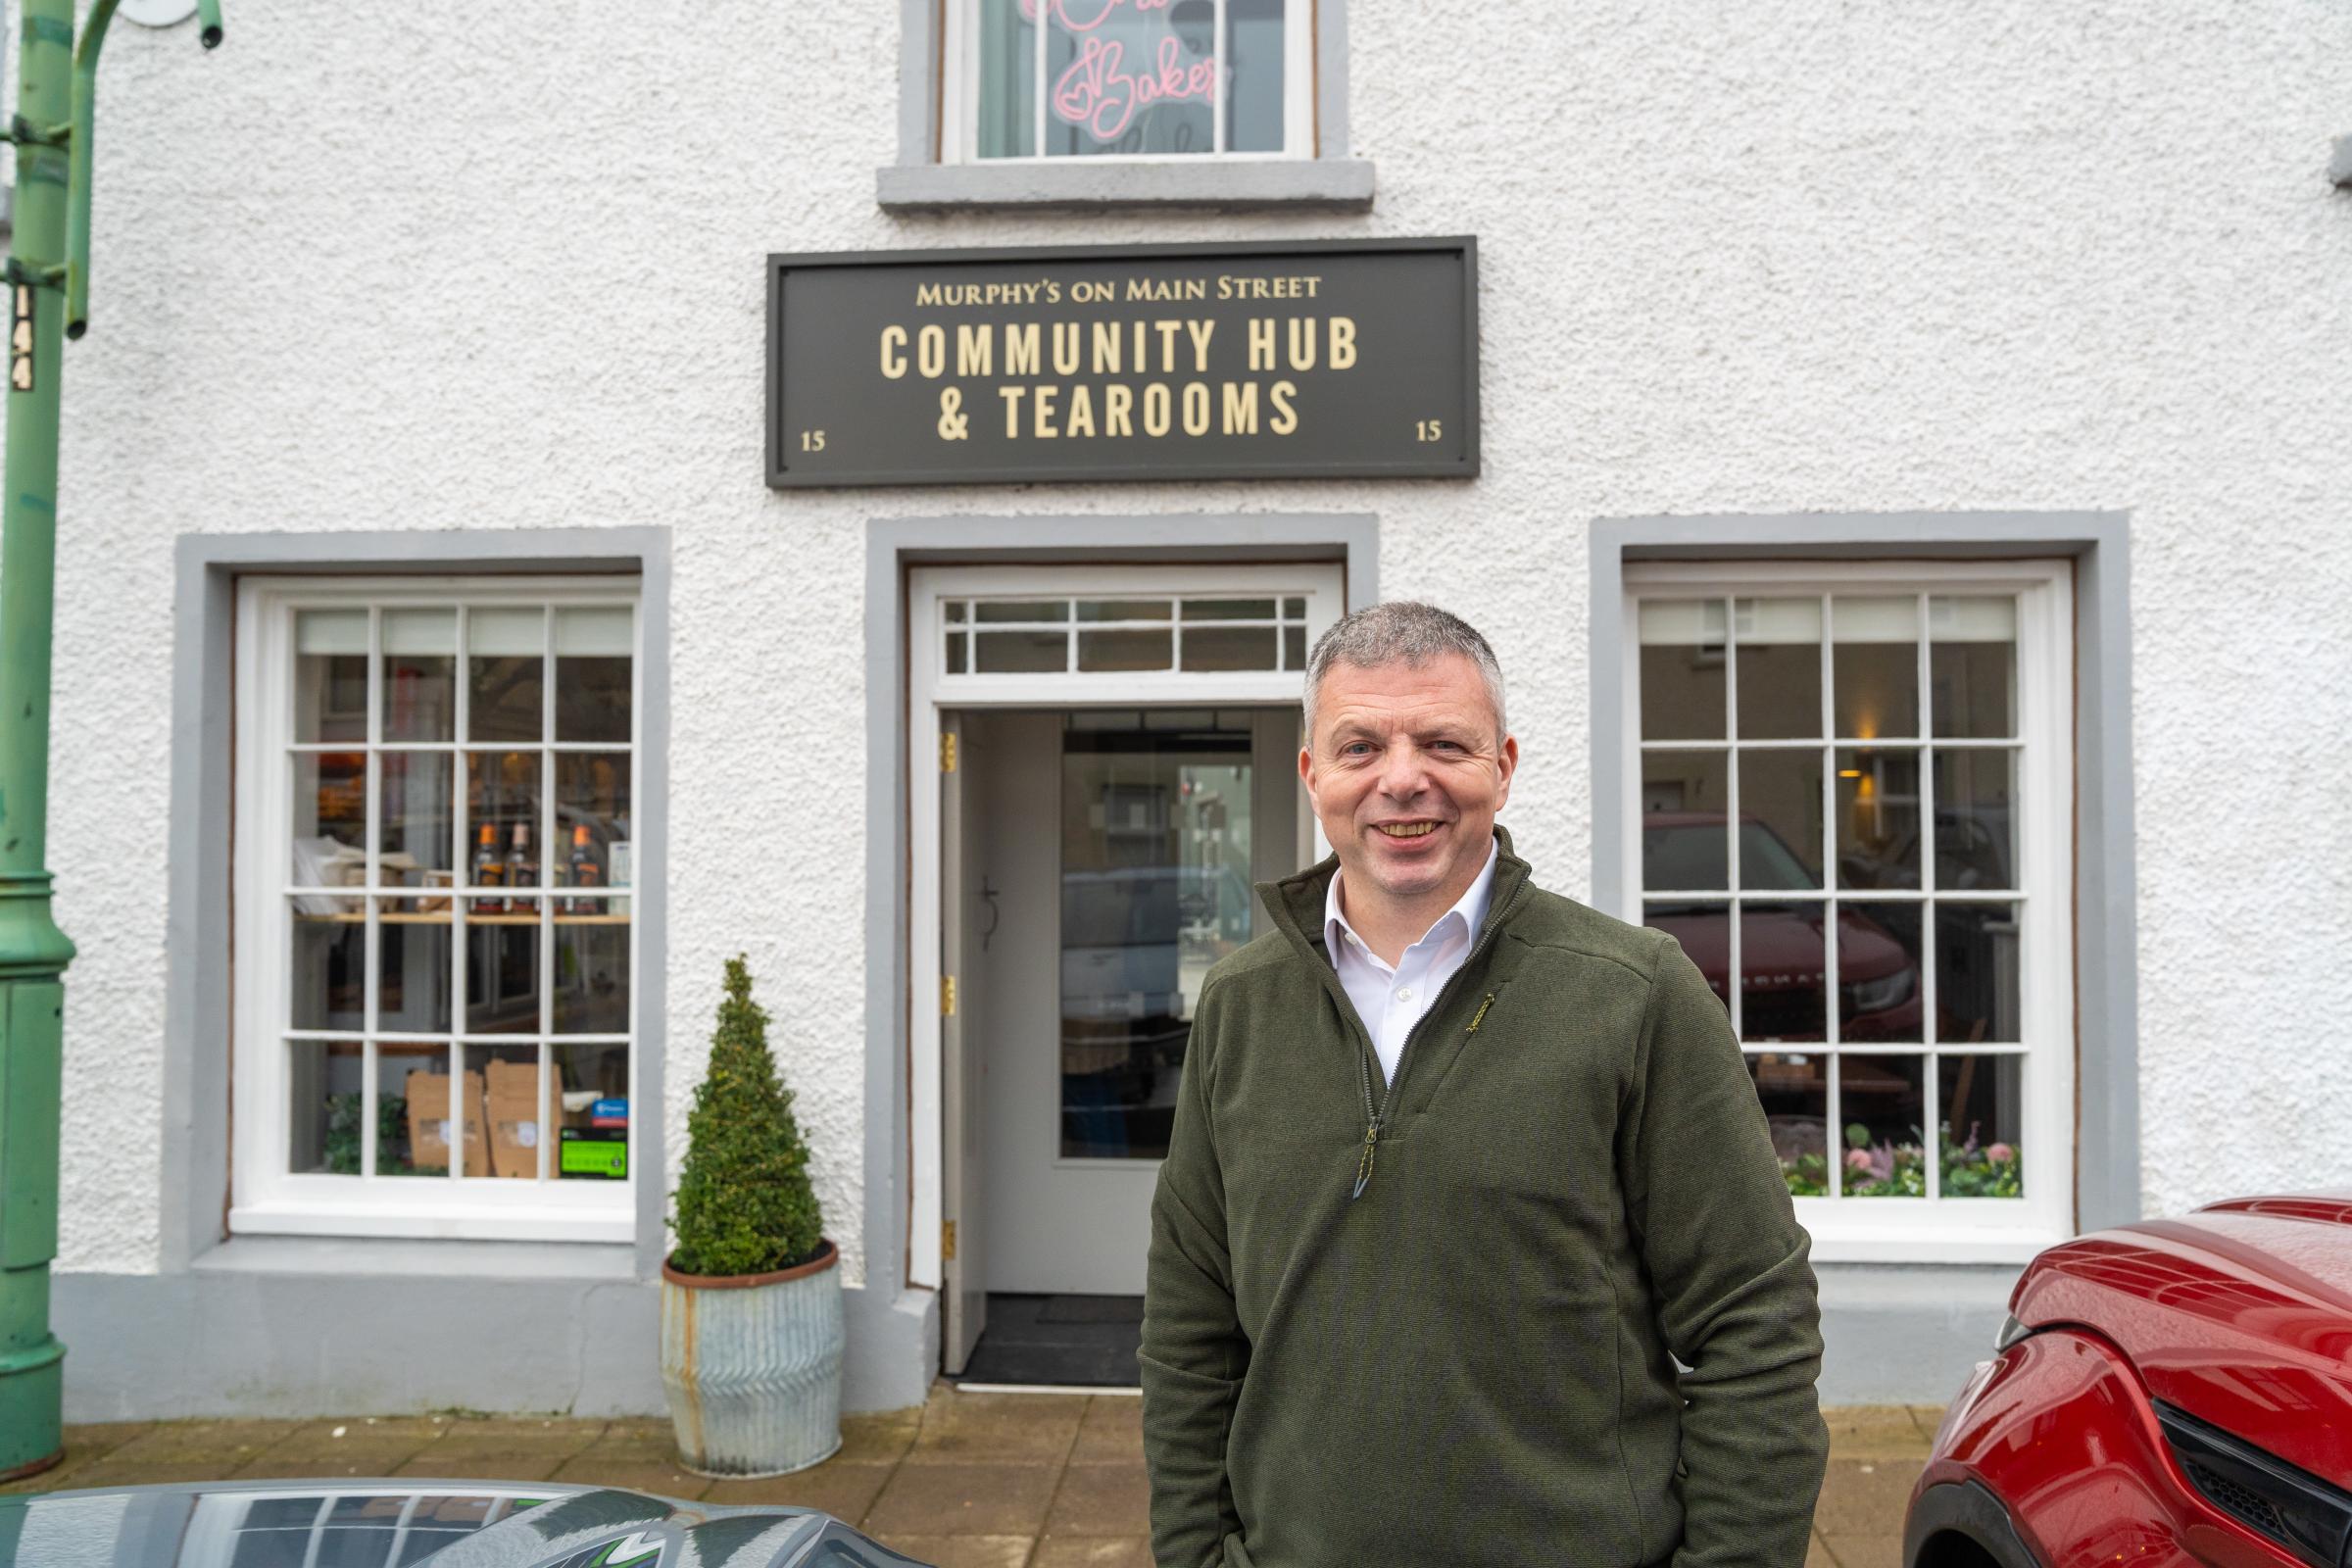 Neil Armstrong, of Murphys On Main Street Community Hub and Tea Rooms in Ederney.